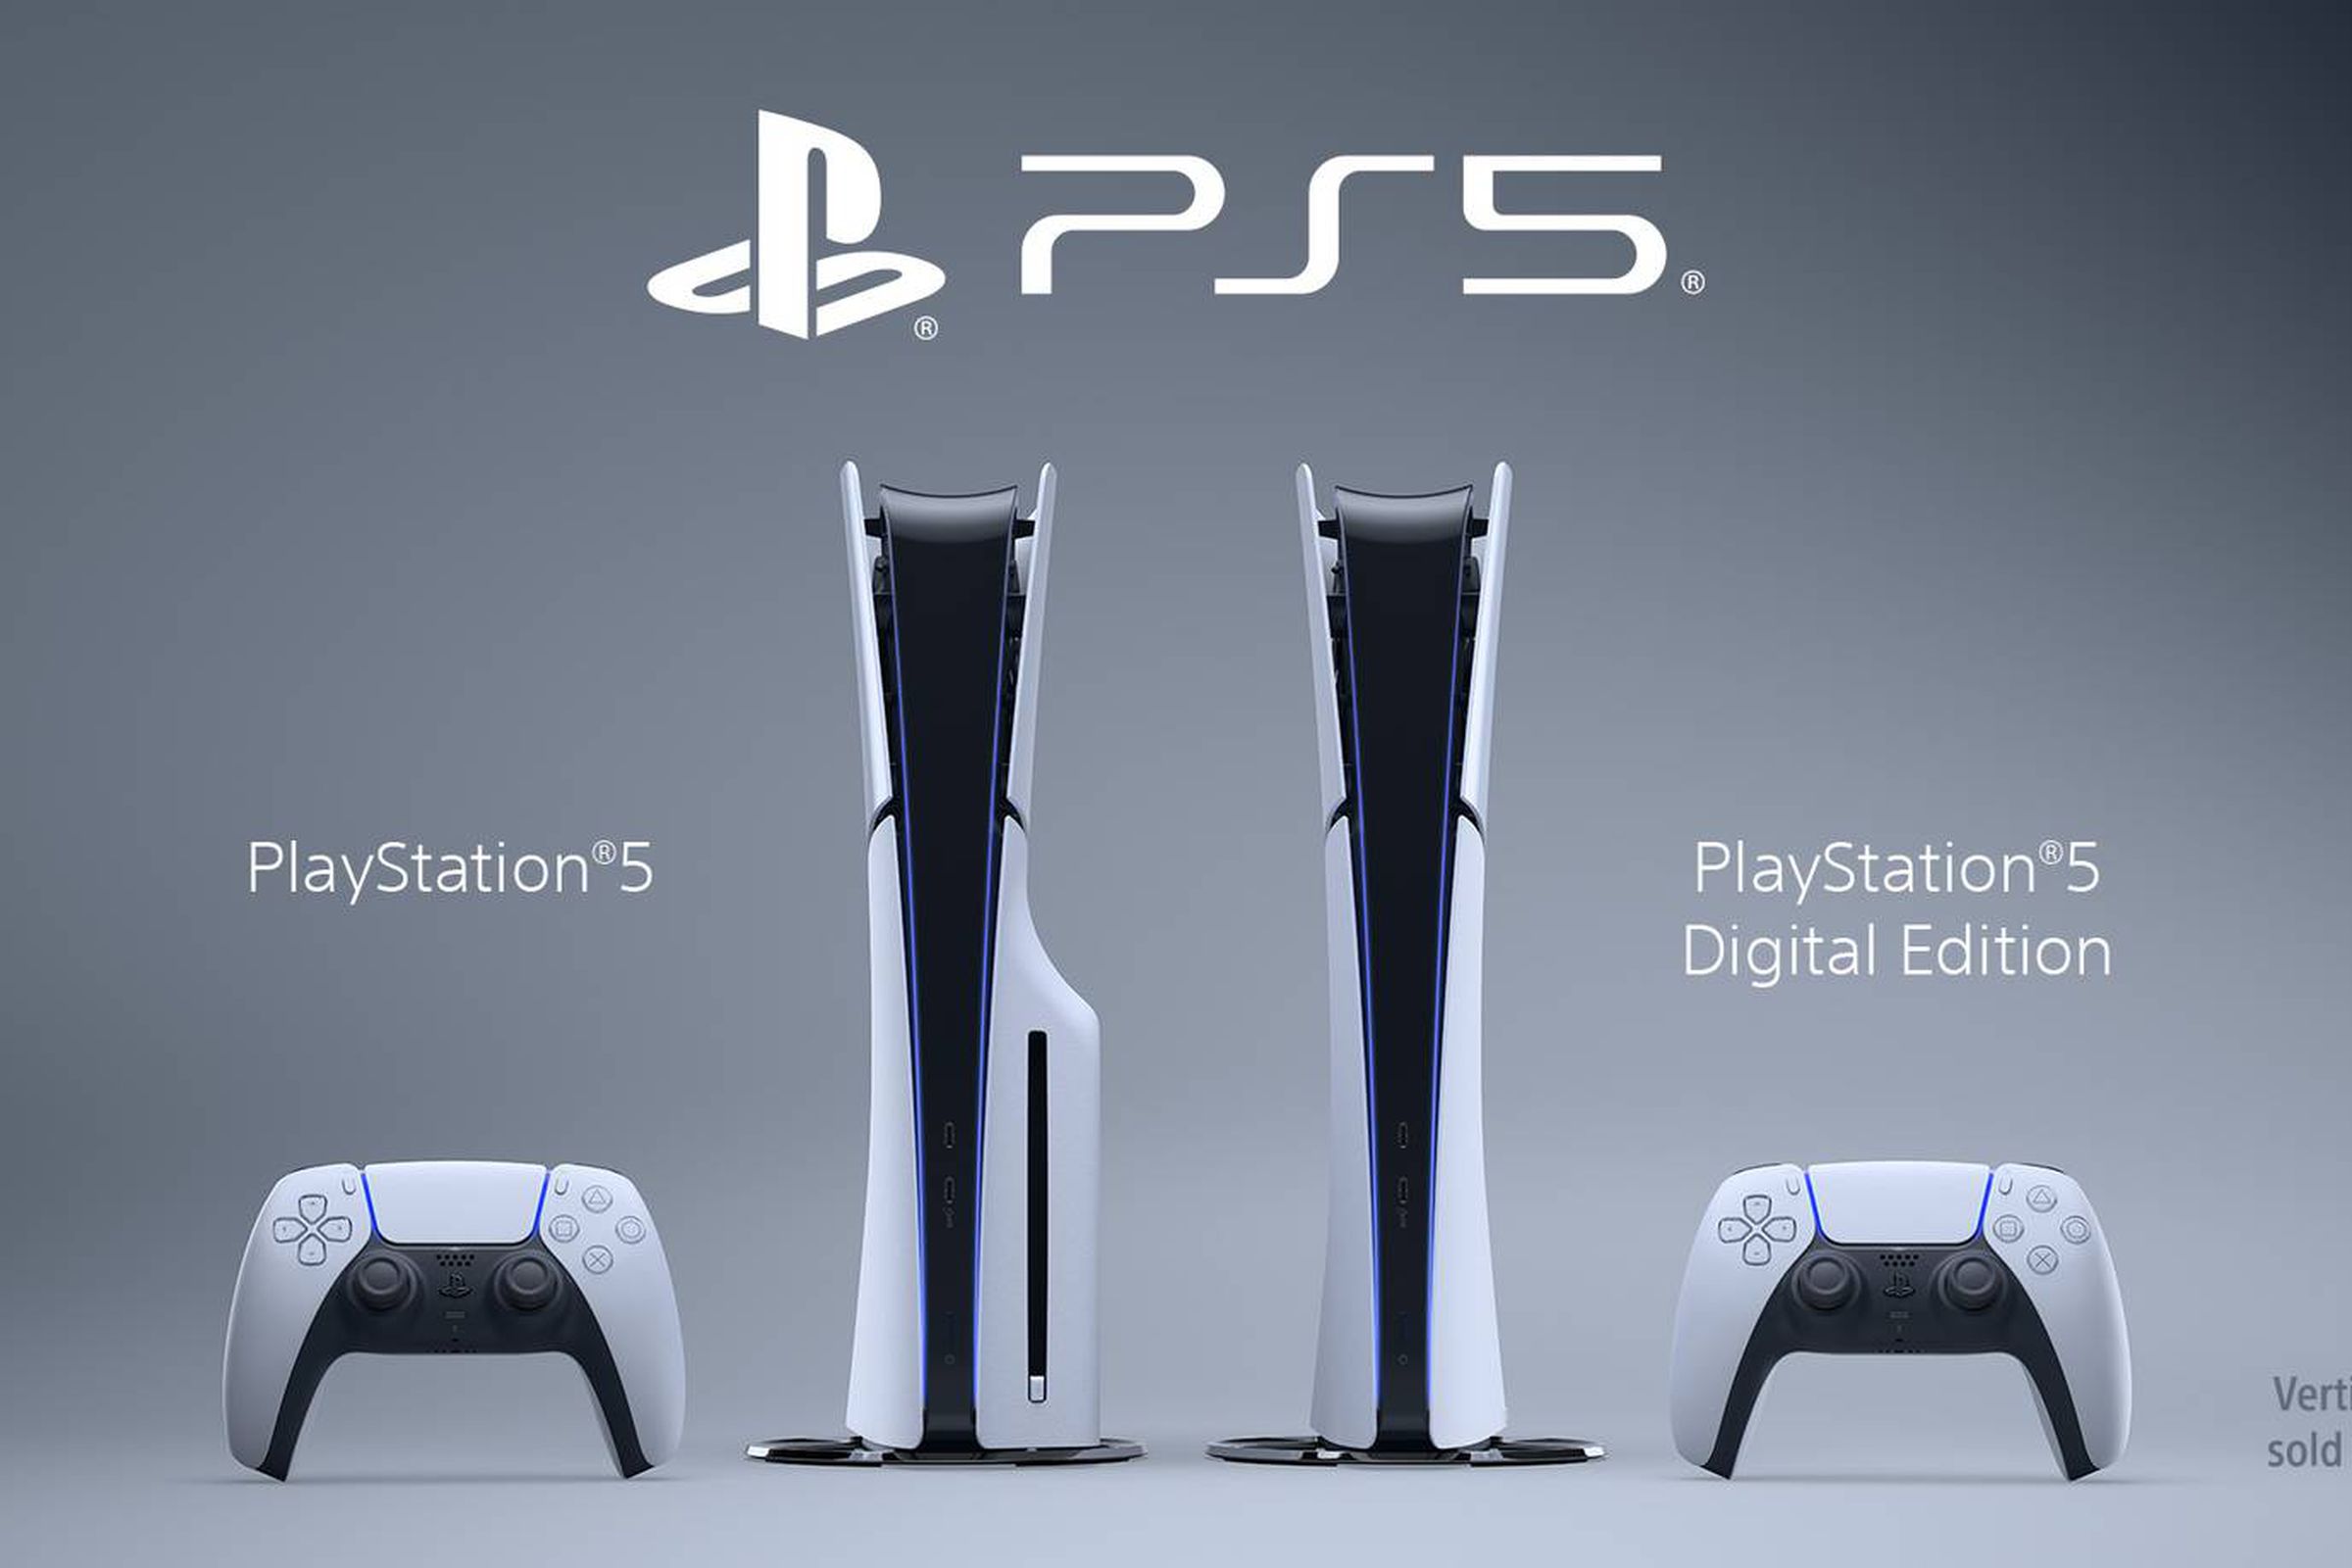 An image of the new PS5 models.